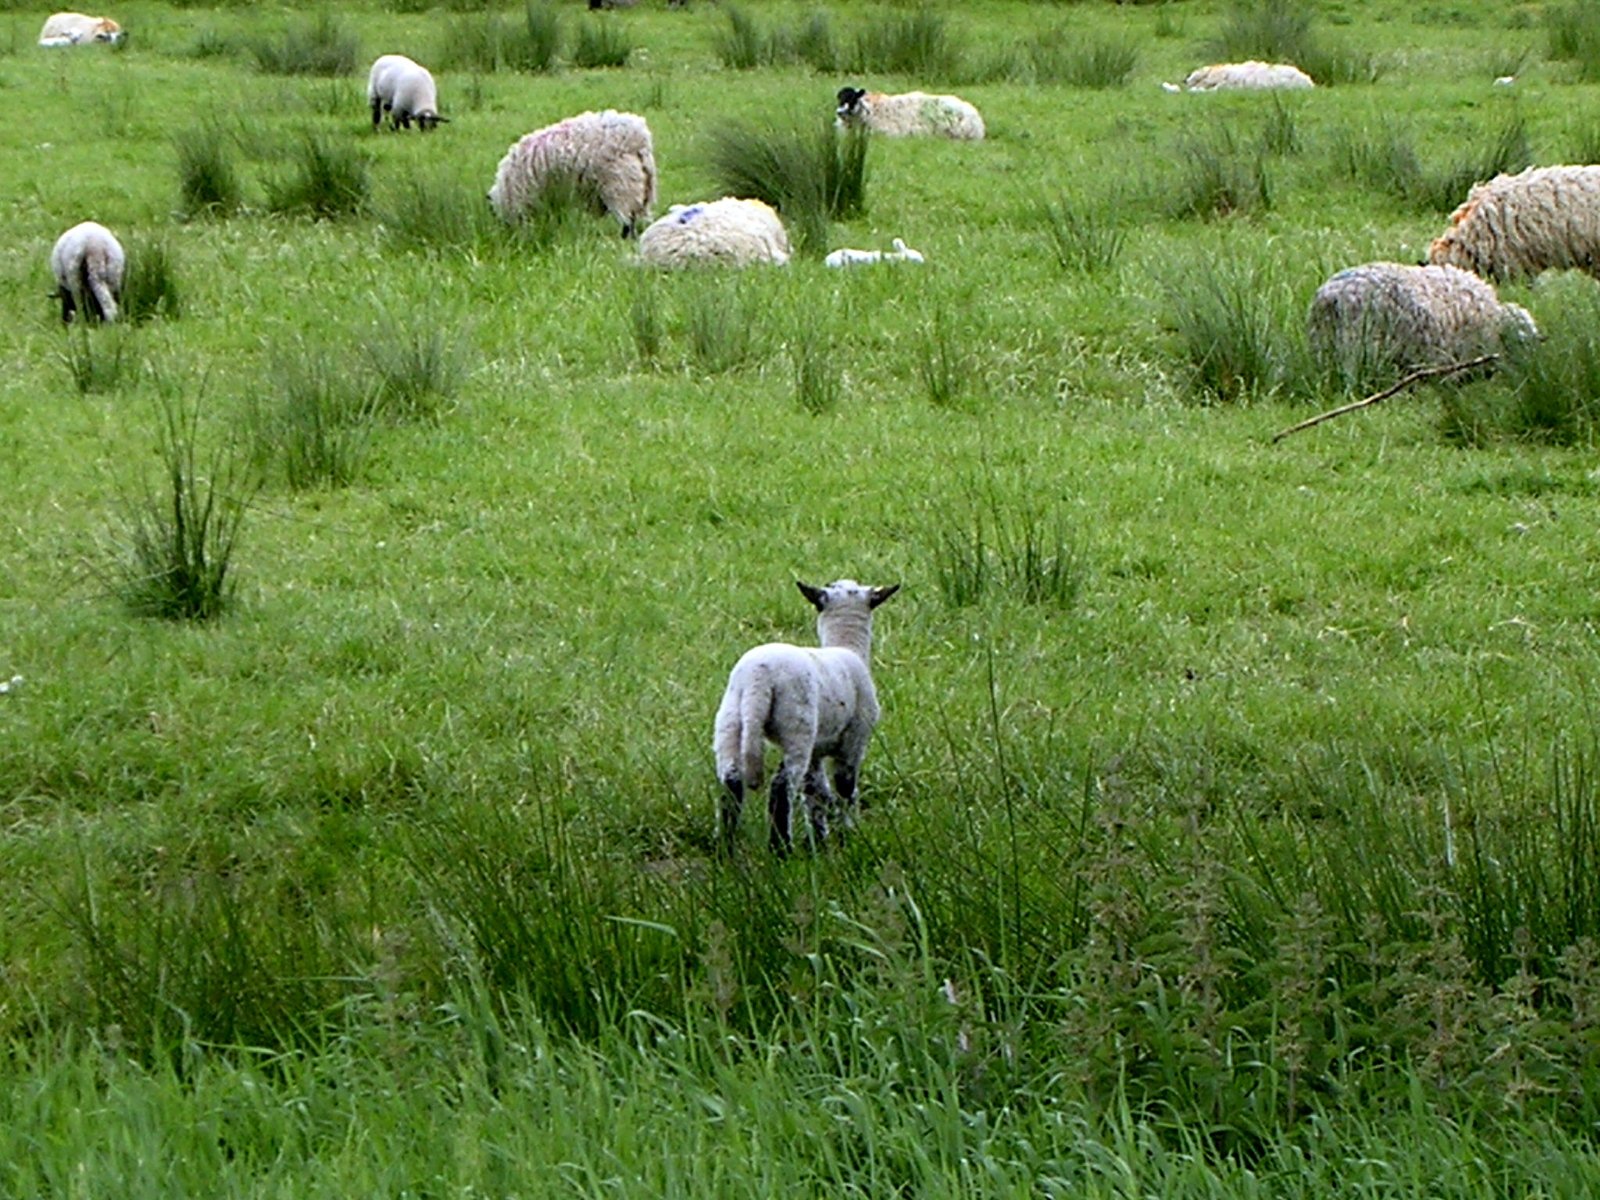 sheep grazing in a field while another sheep looks on